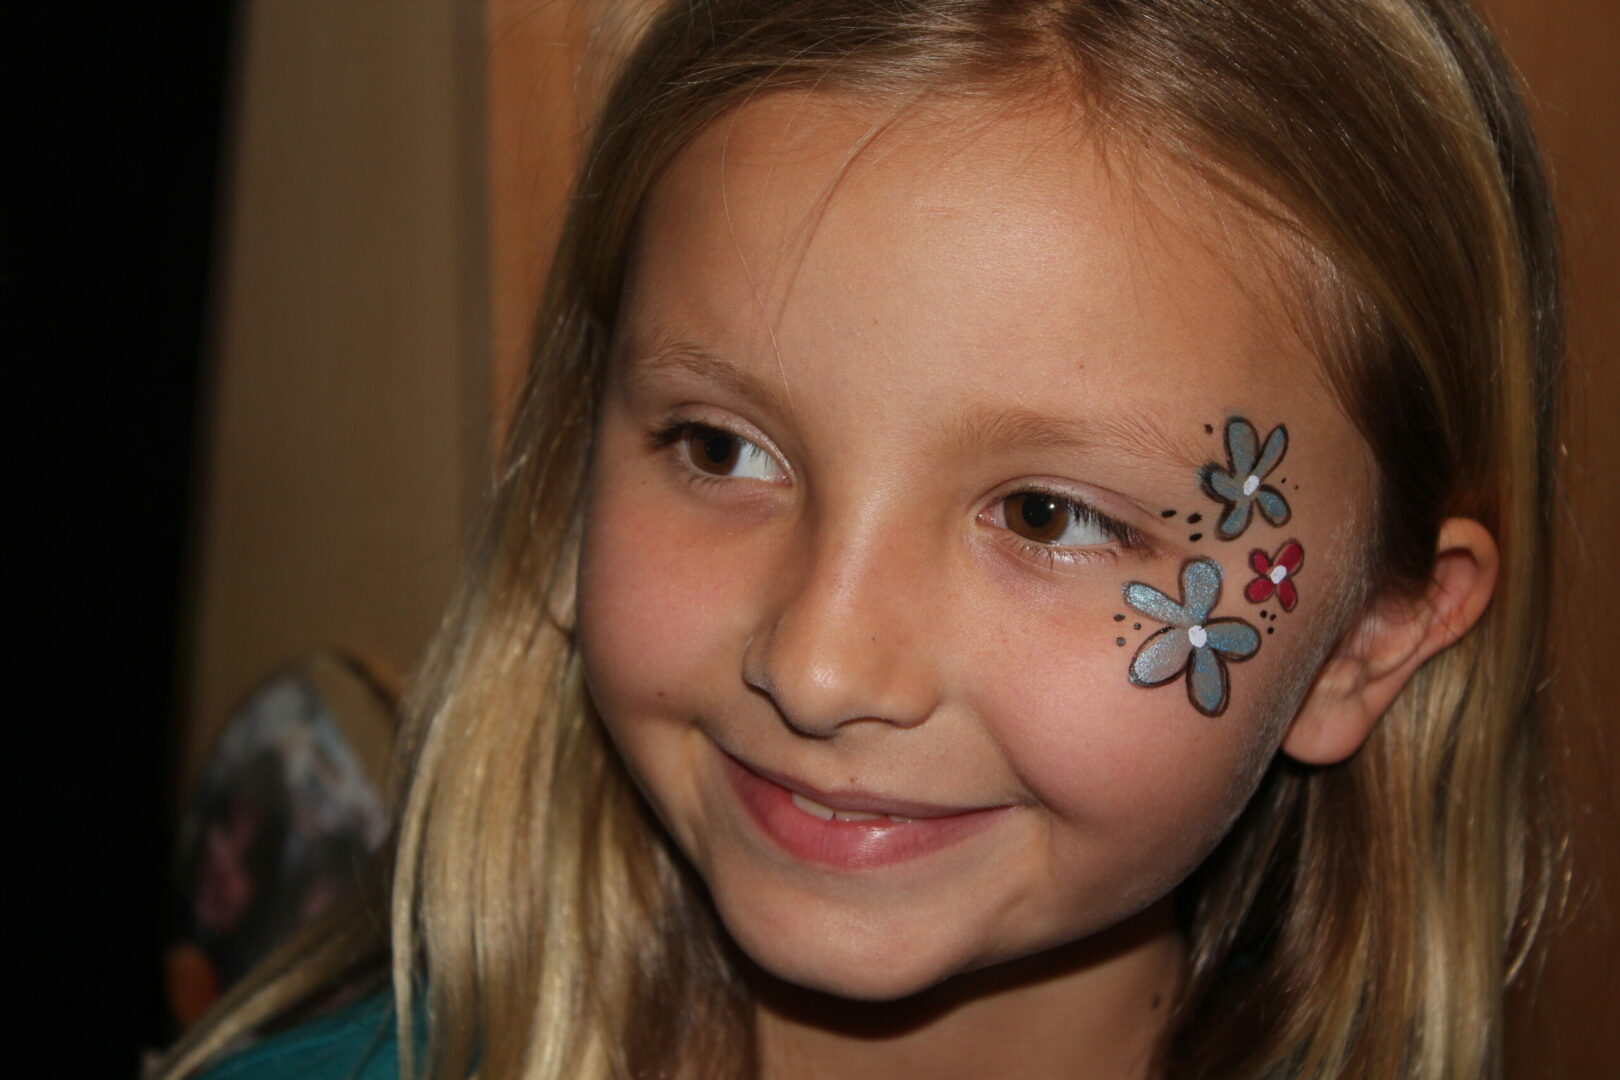 A girl with flowers painted on her face.